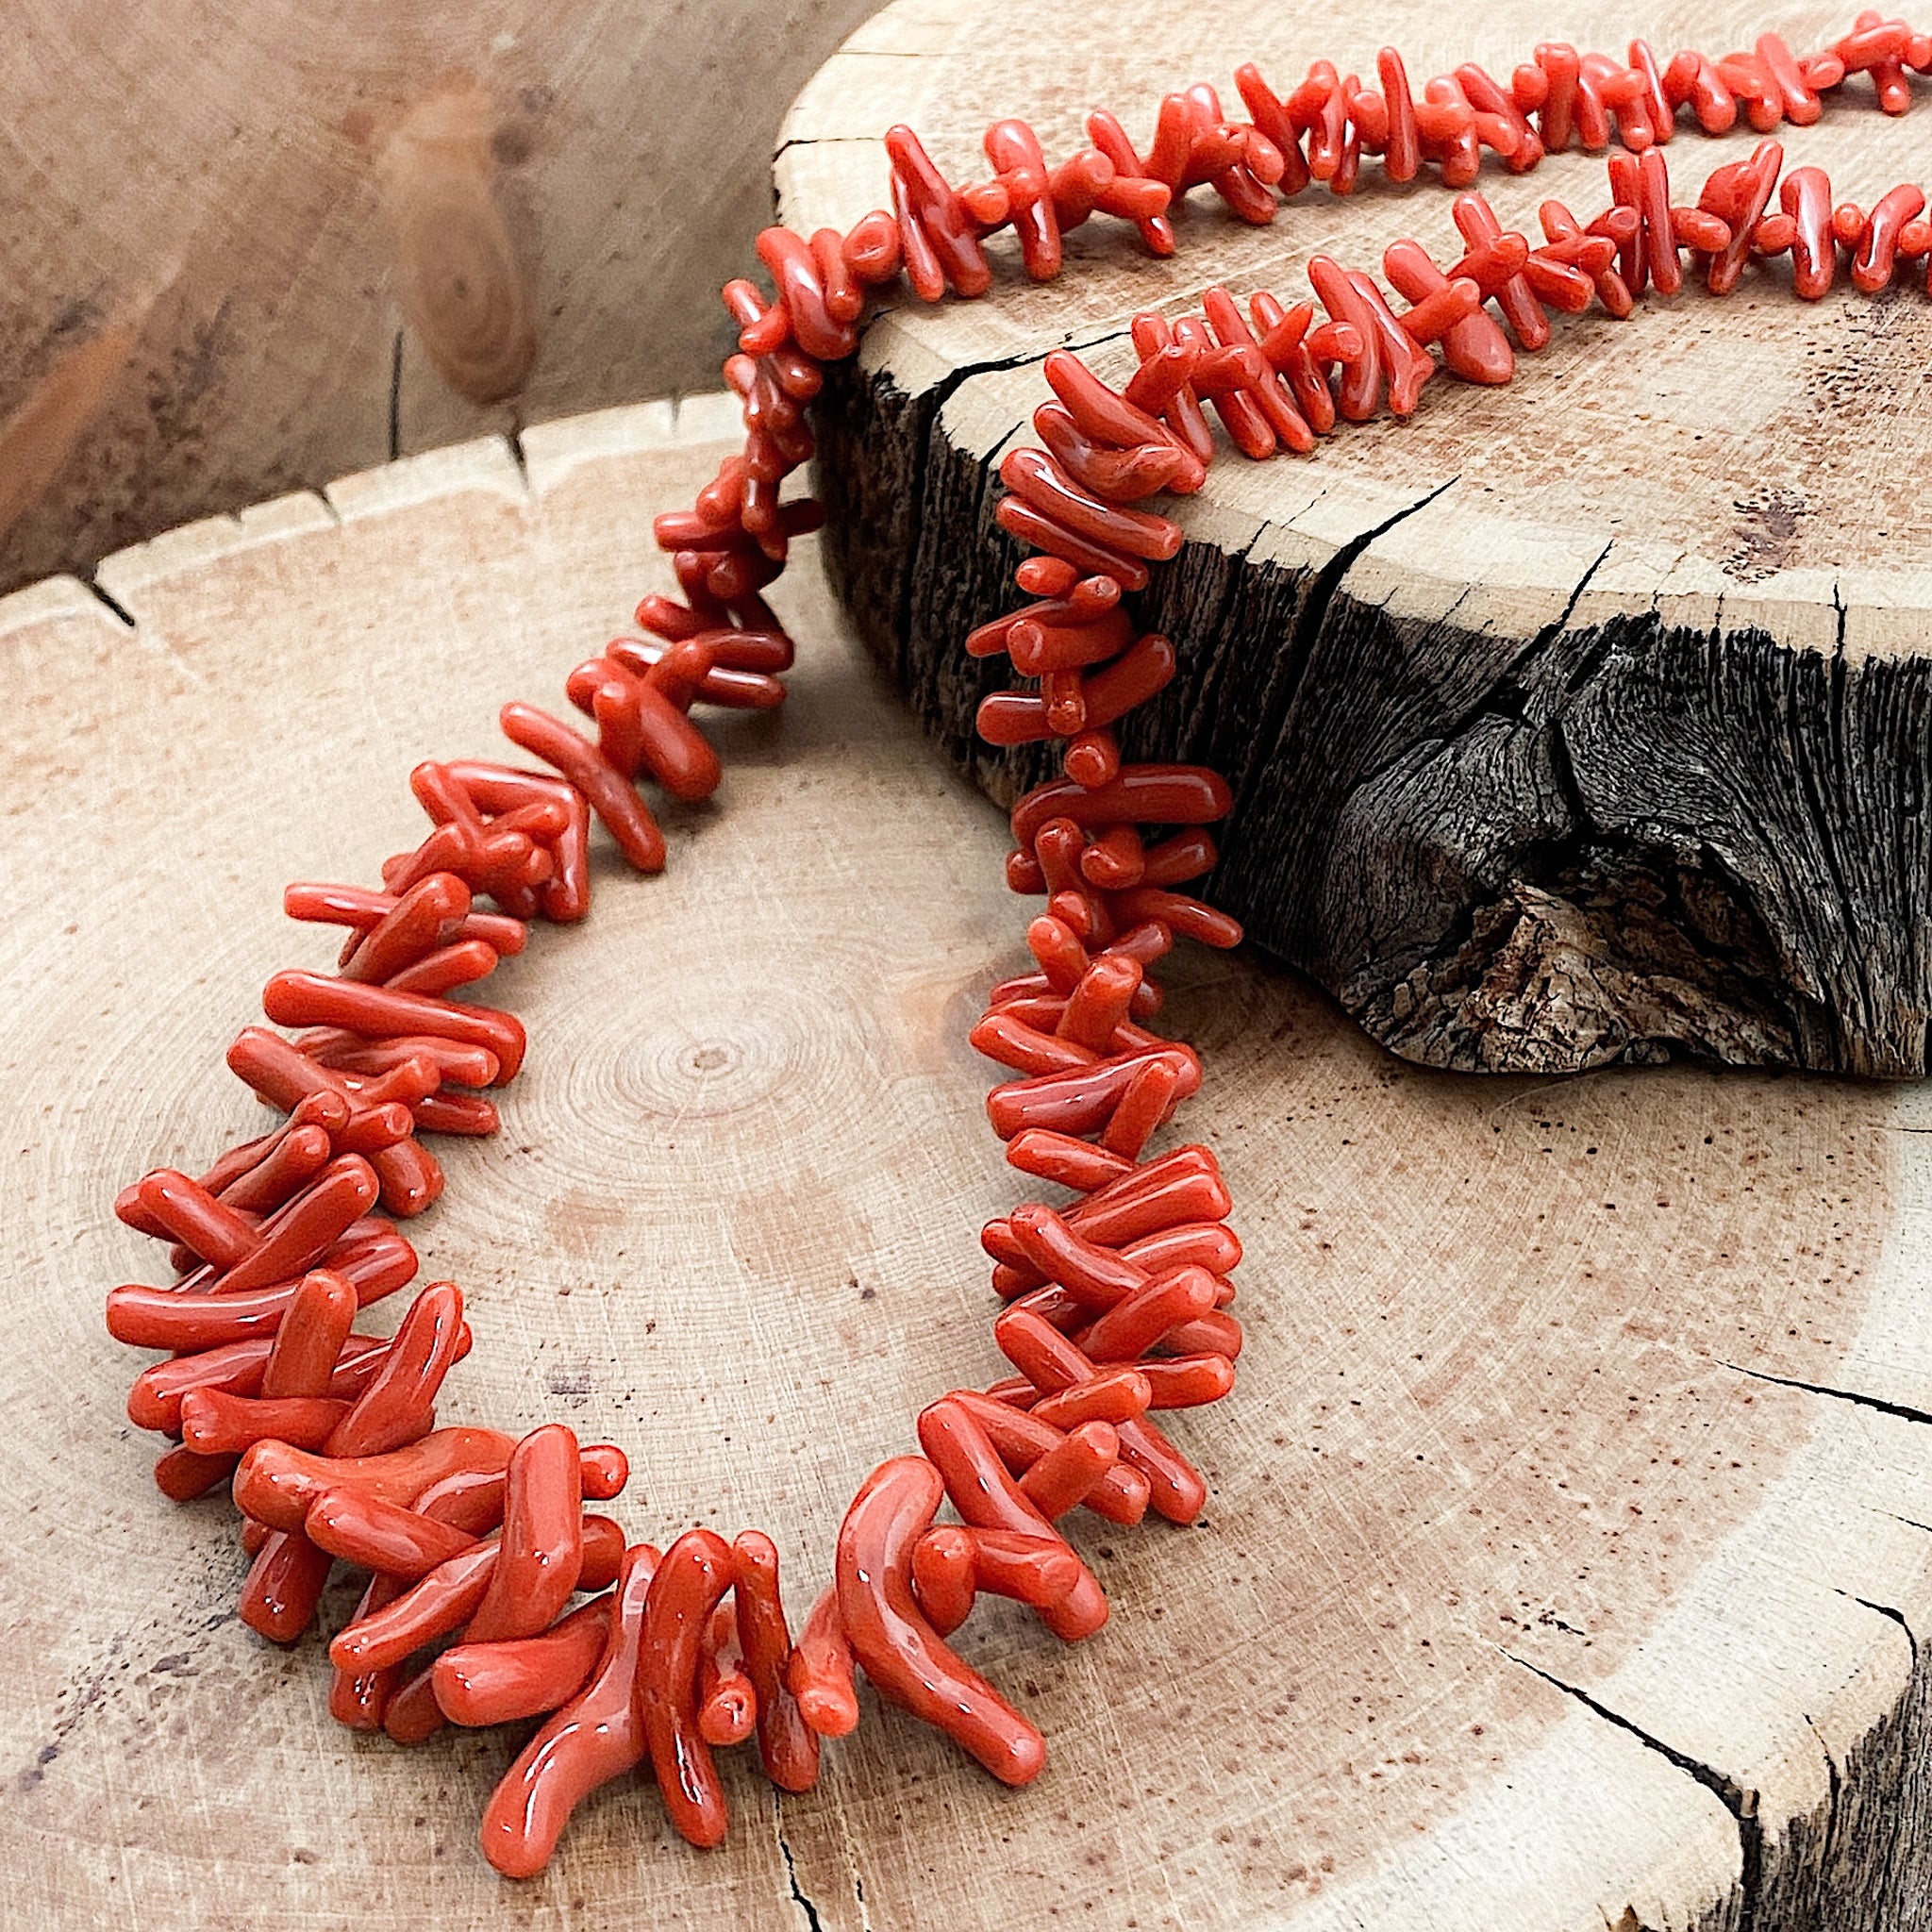 LUXURY series necklace - L 50 cm approx. made with branches of Torre del  Greco coral